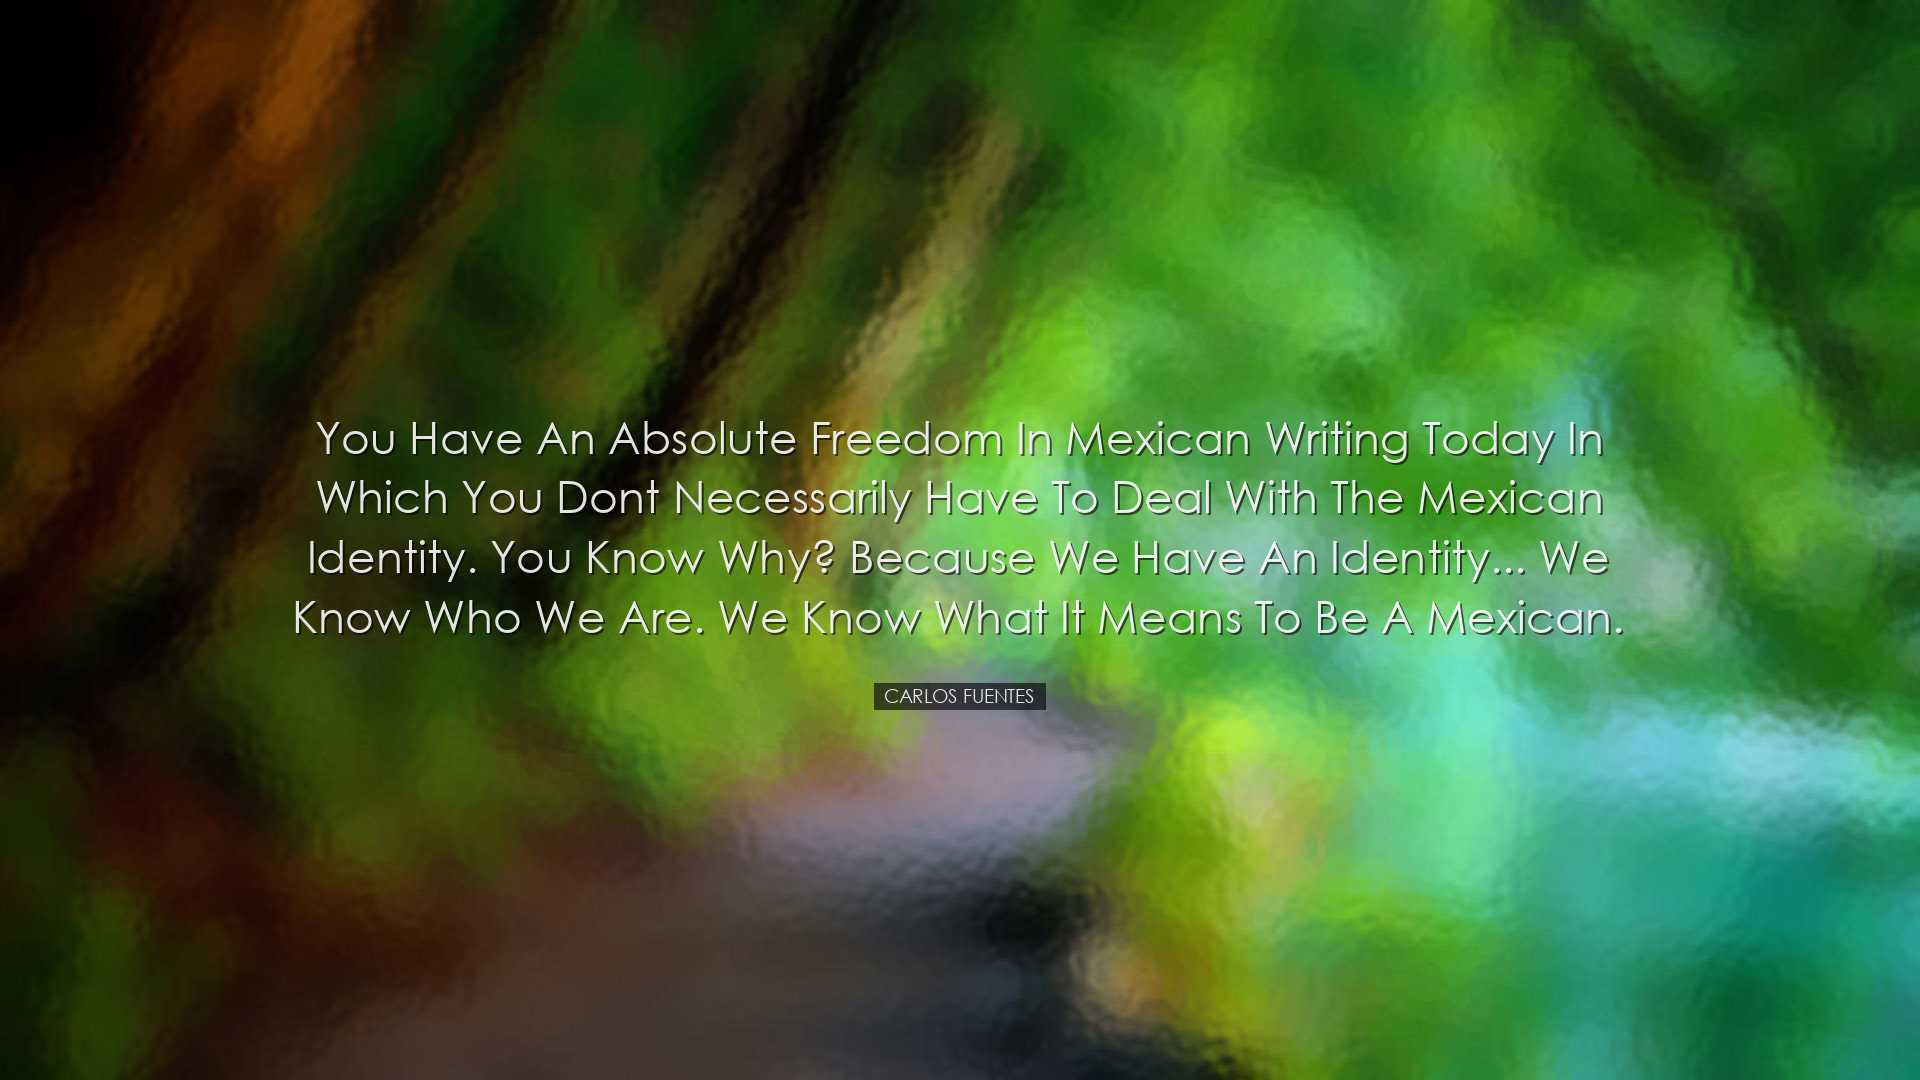 You have an absolute freedom in Mexican writing today in which you